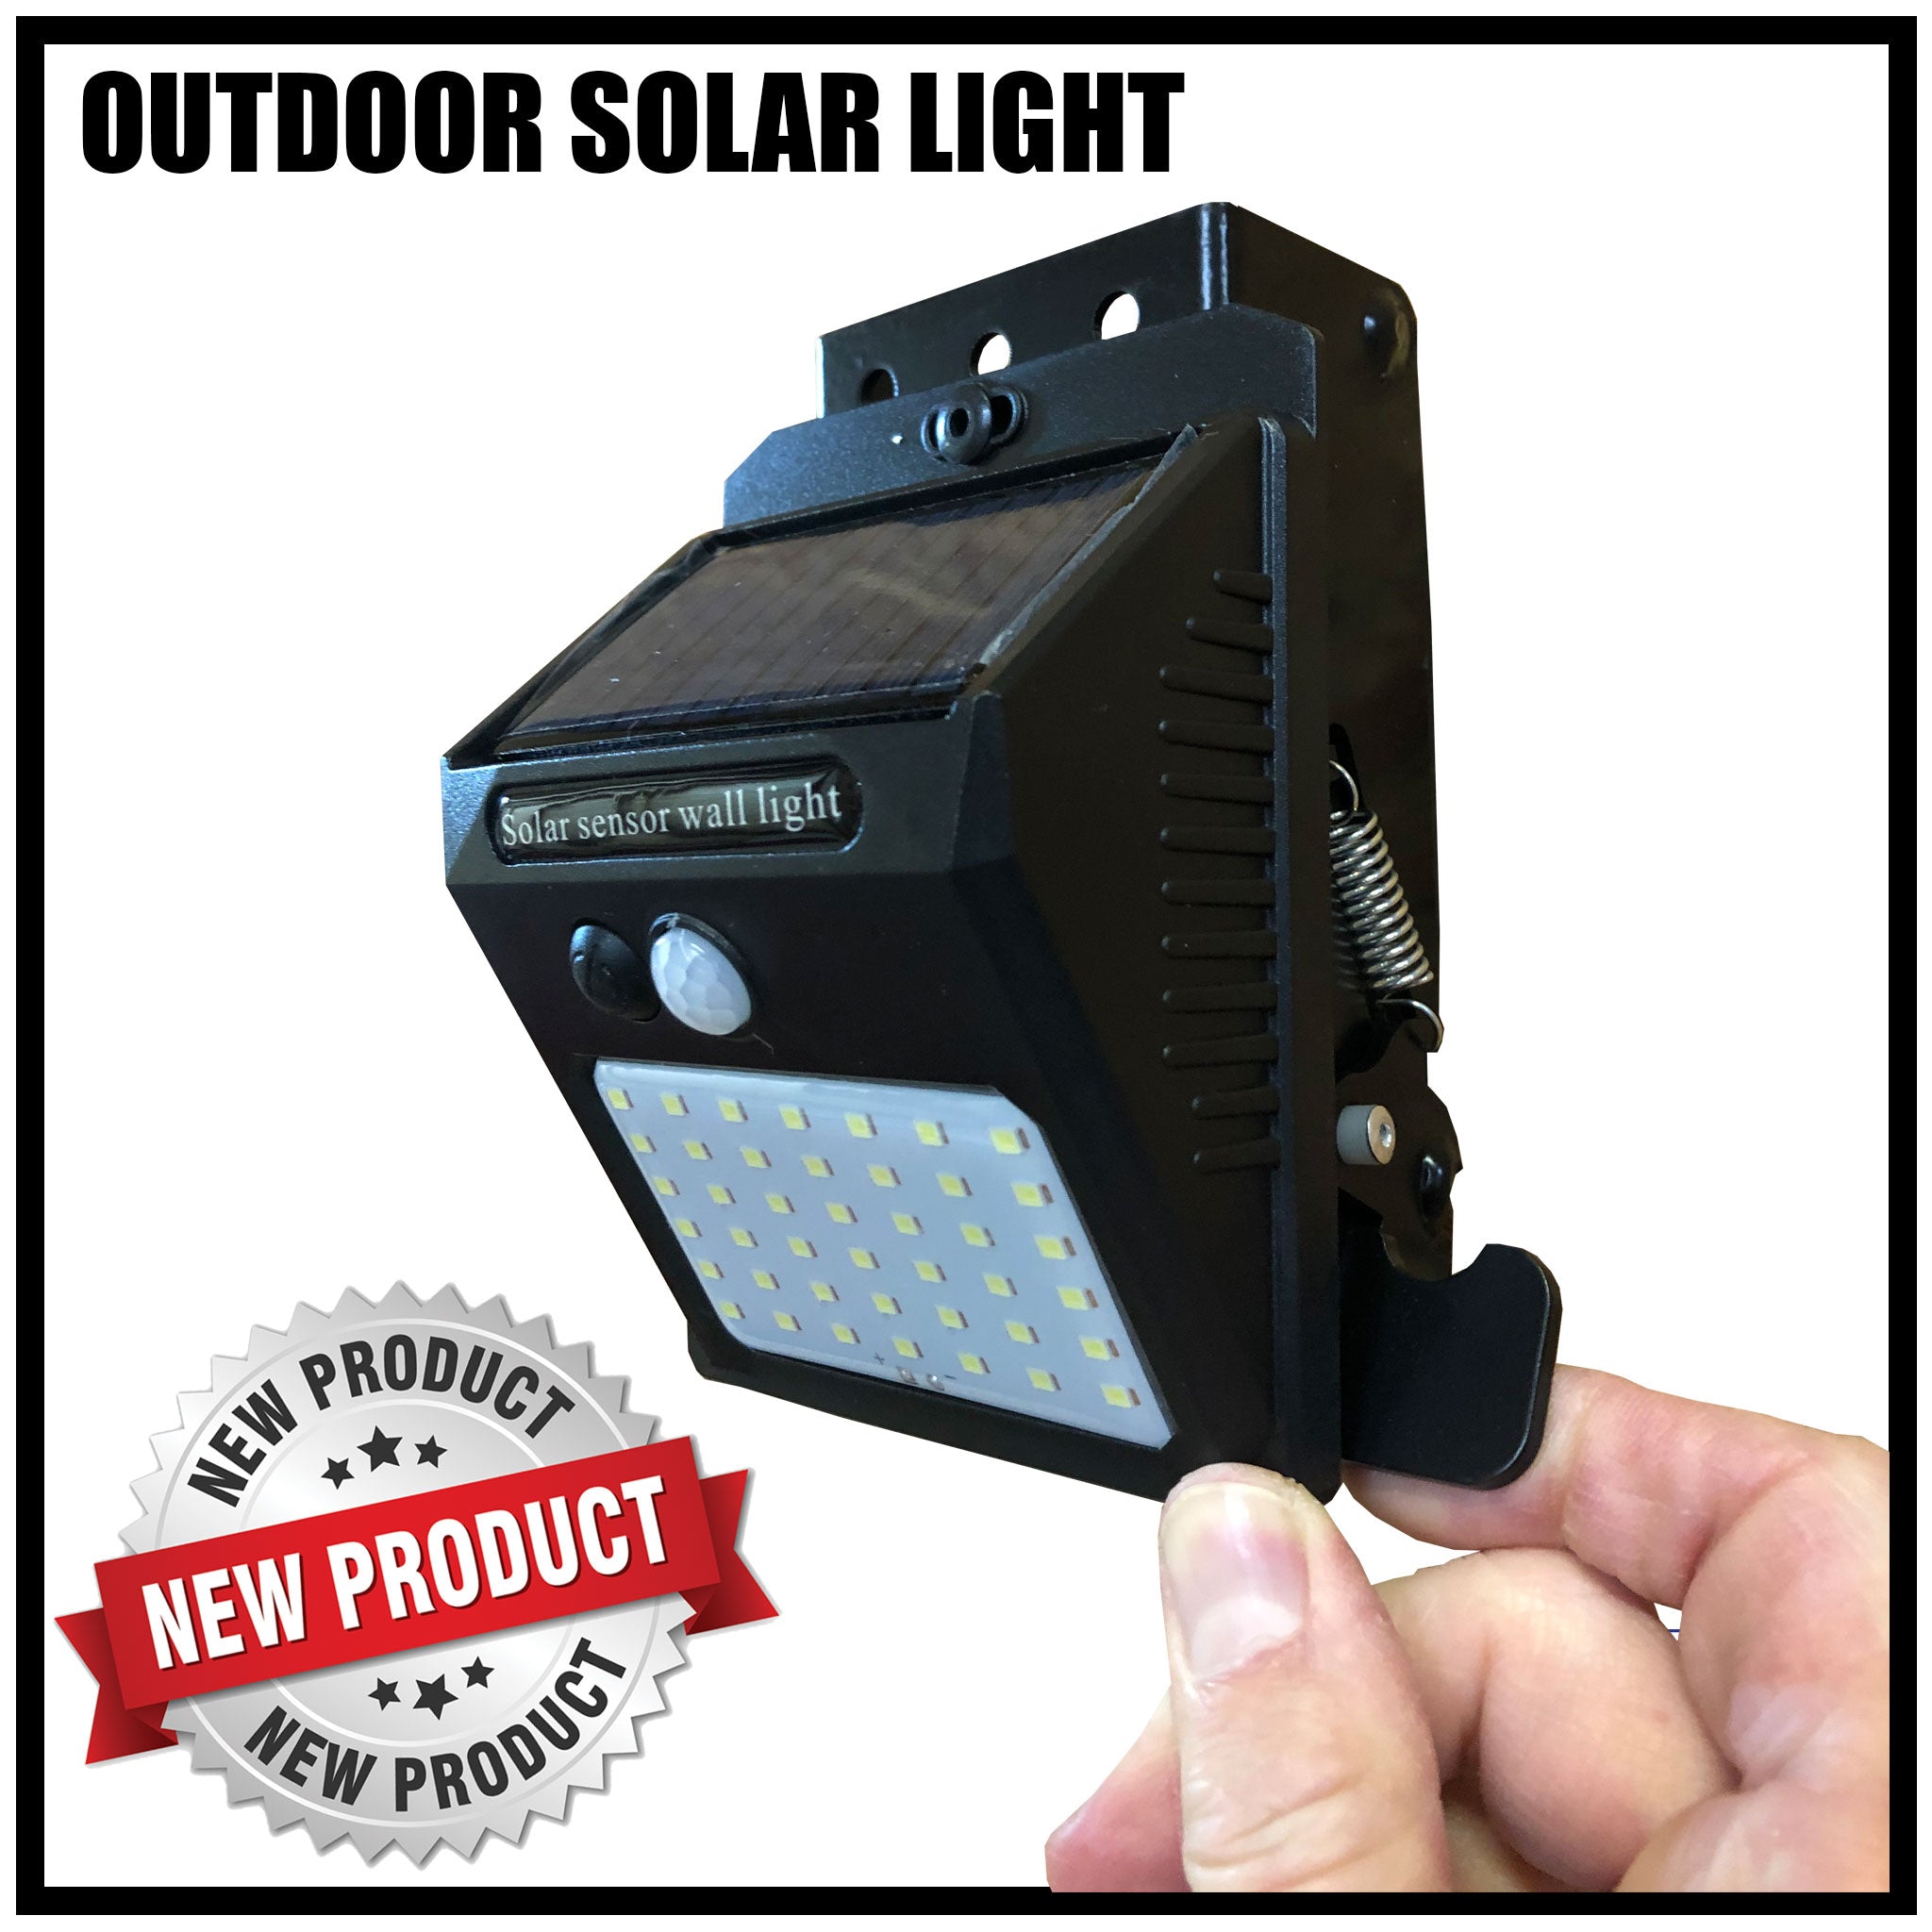 Kebloc Solar Light, Move it anywhere you want that you have a Kebloc mounted.  Jayco, Camping, Campers, Forest River, Lance Campers, Thor, Grand Design